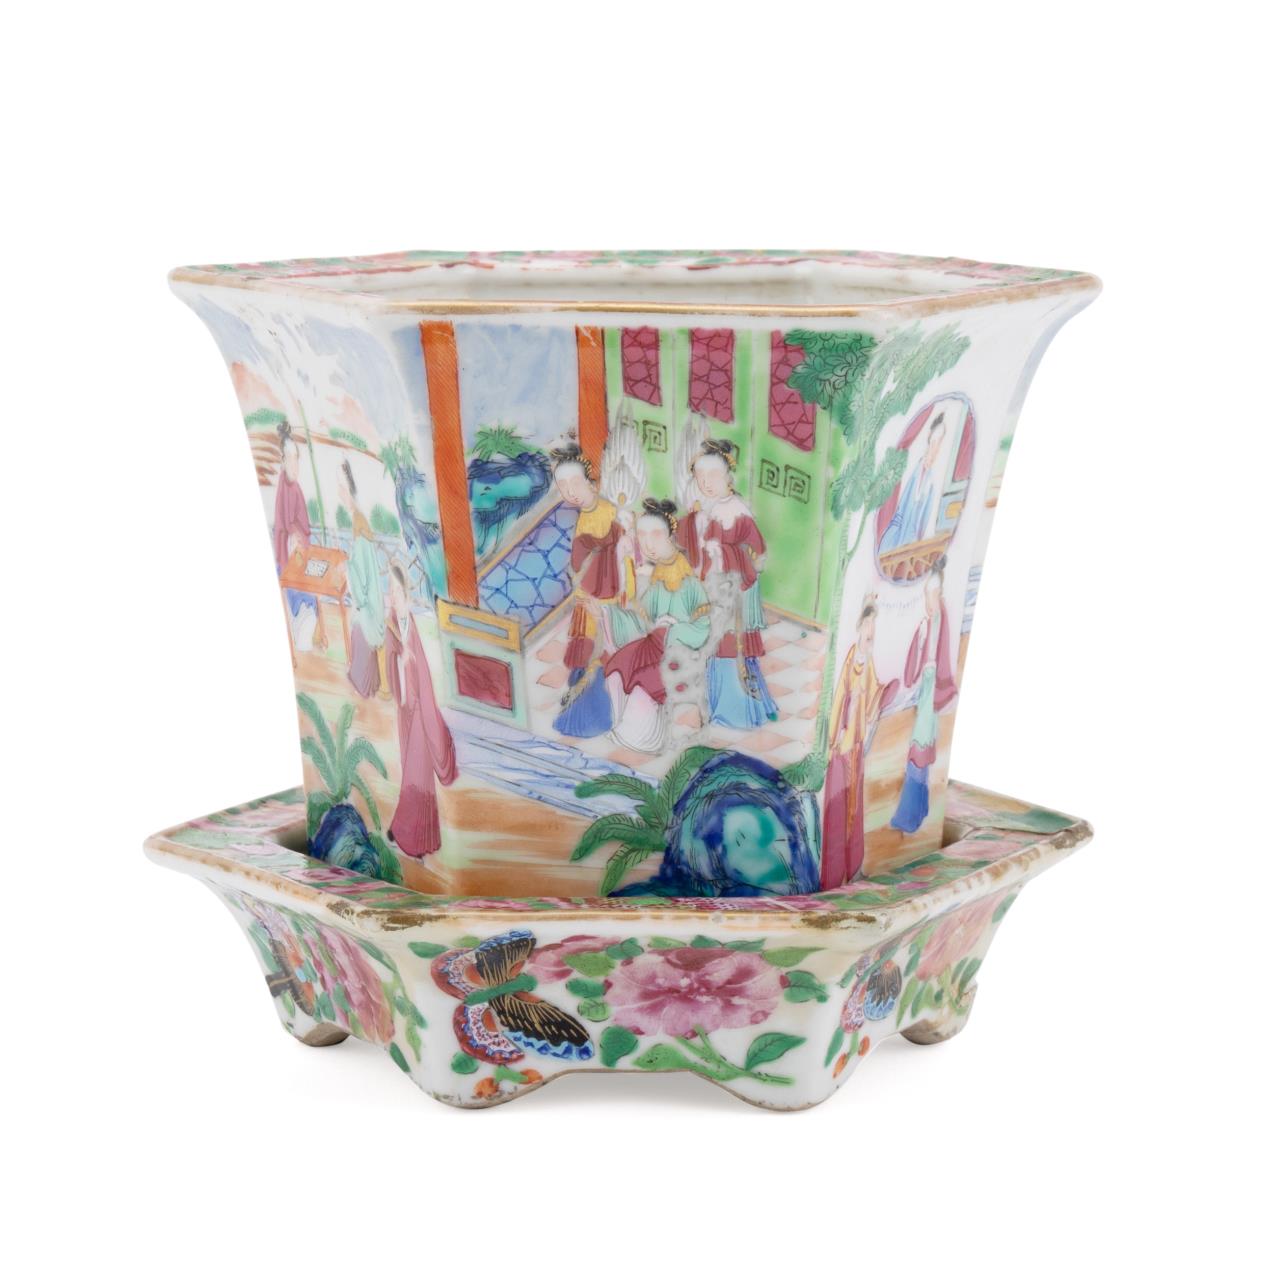 CHINESE ROSE MEDALLION PLANTER 3cd4a5